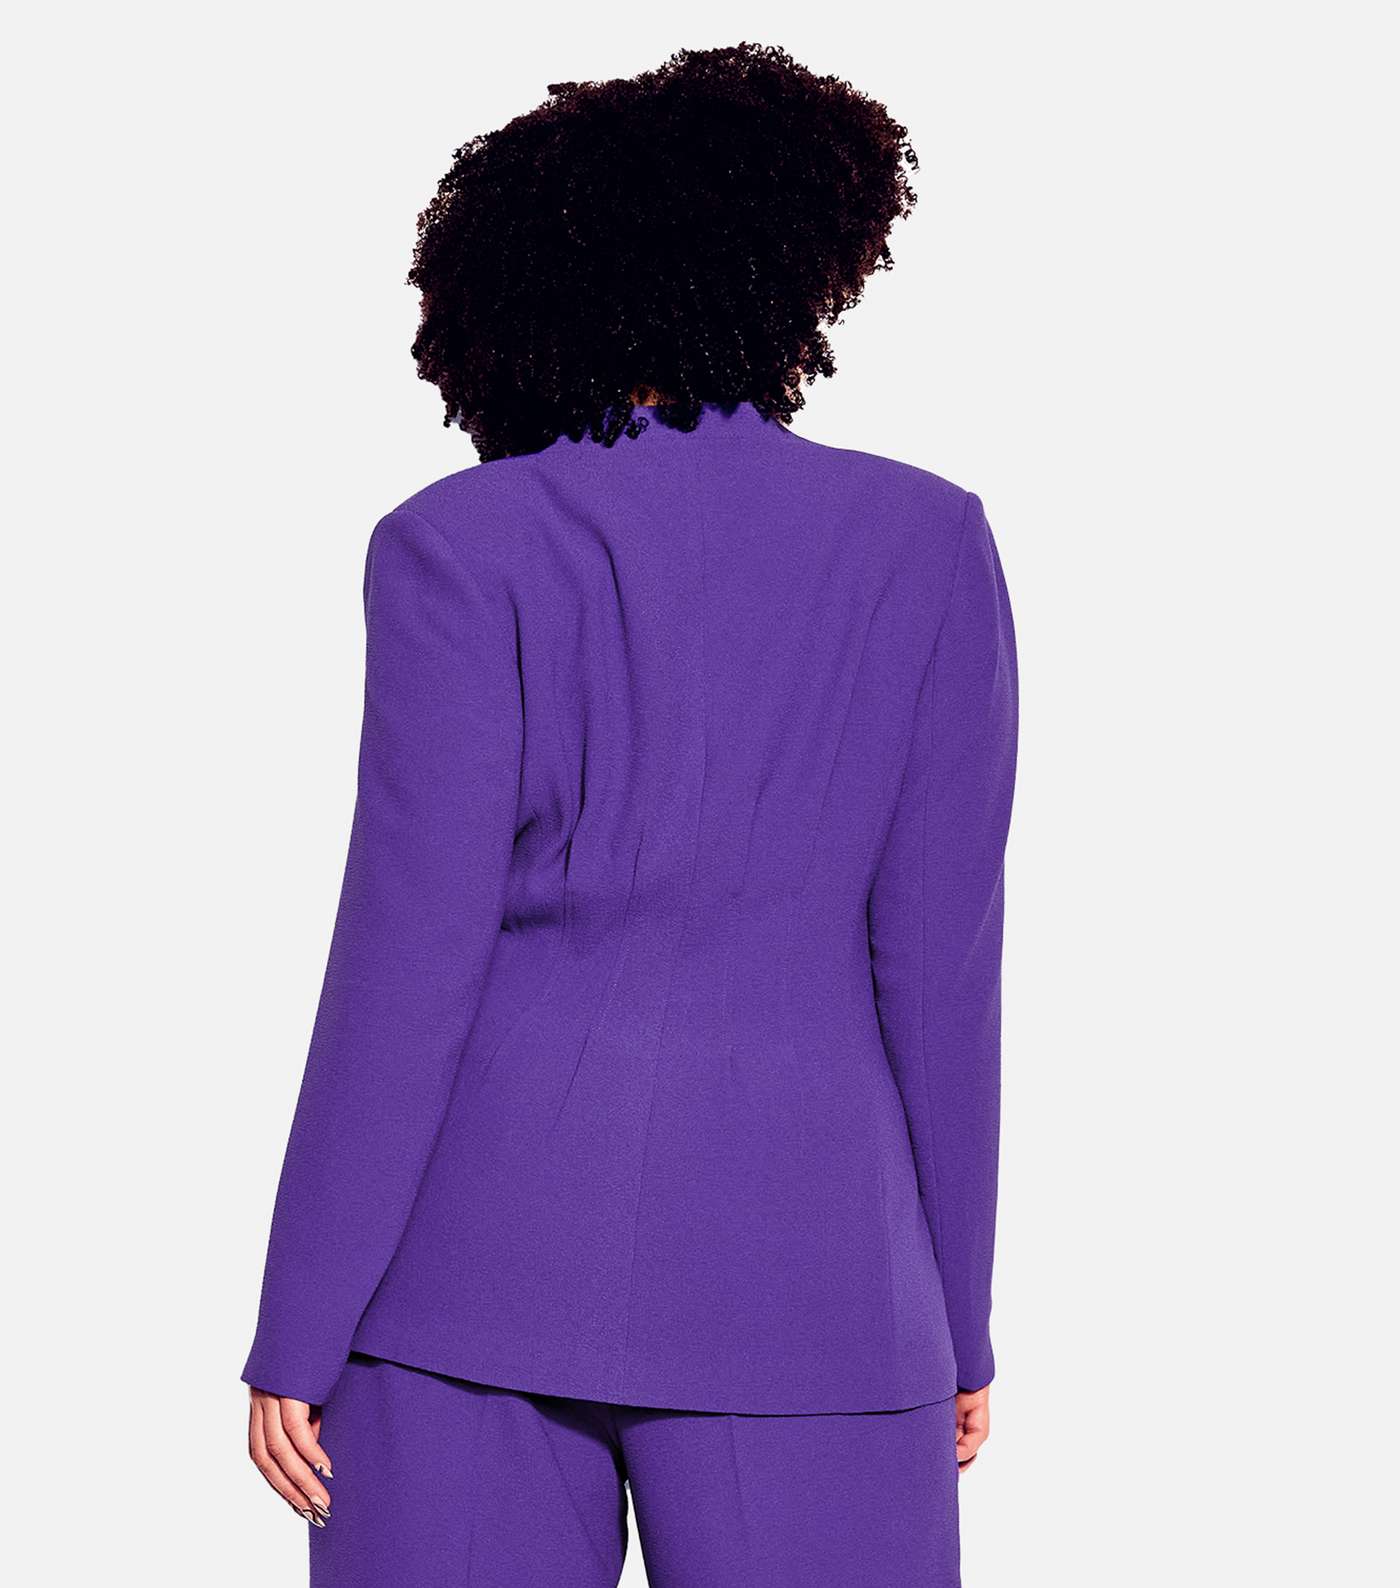 City Chic Curves Purple Belted Wrap Jacket Image 3